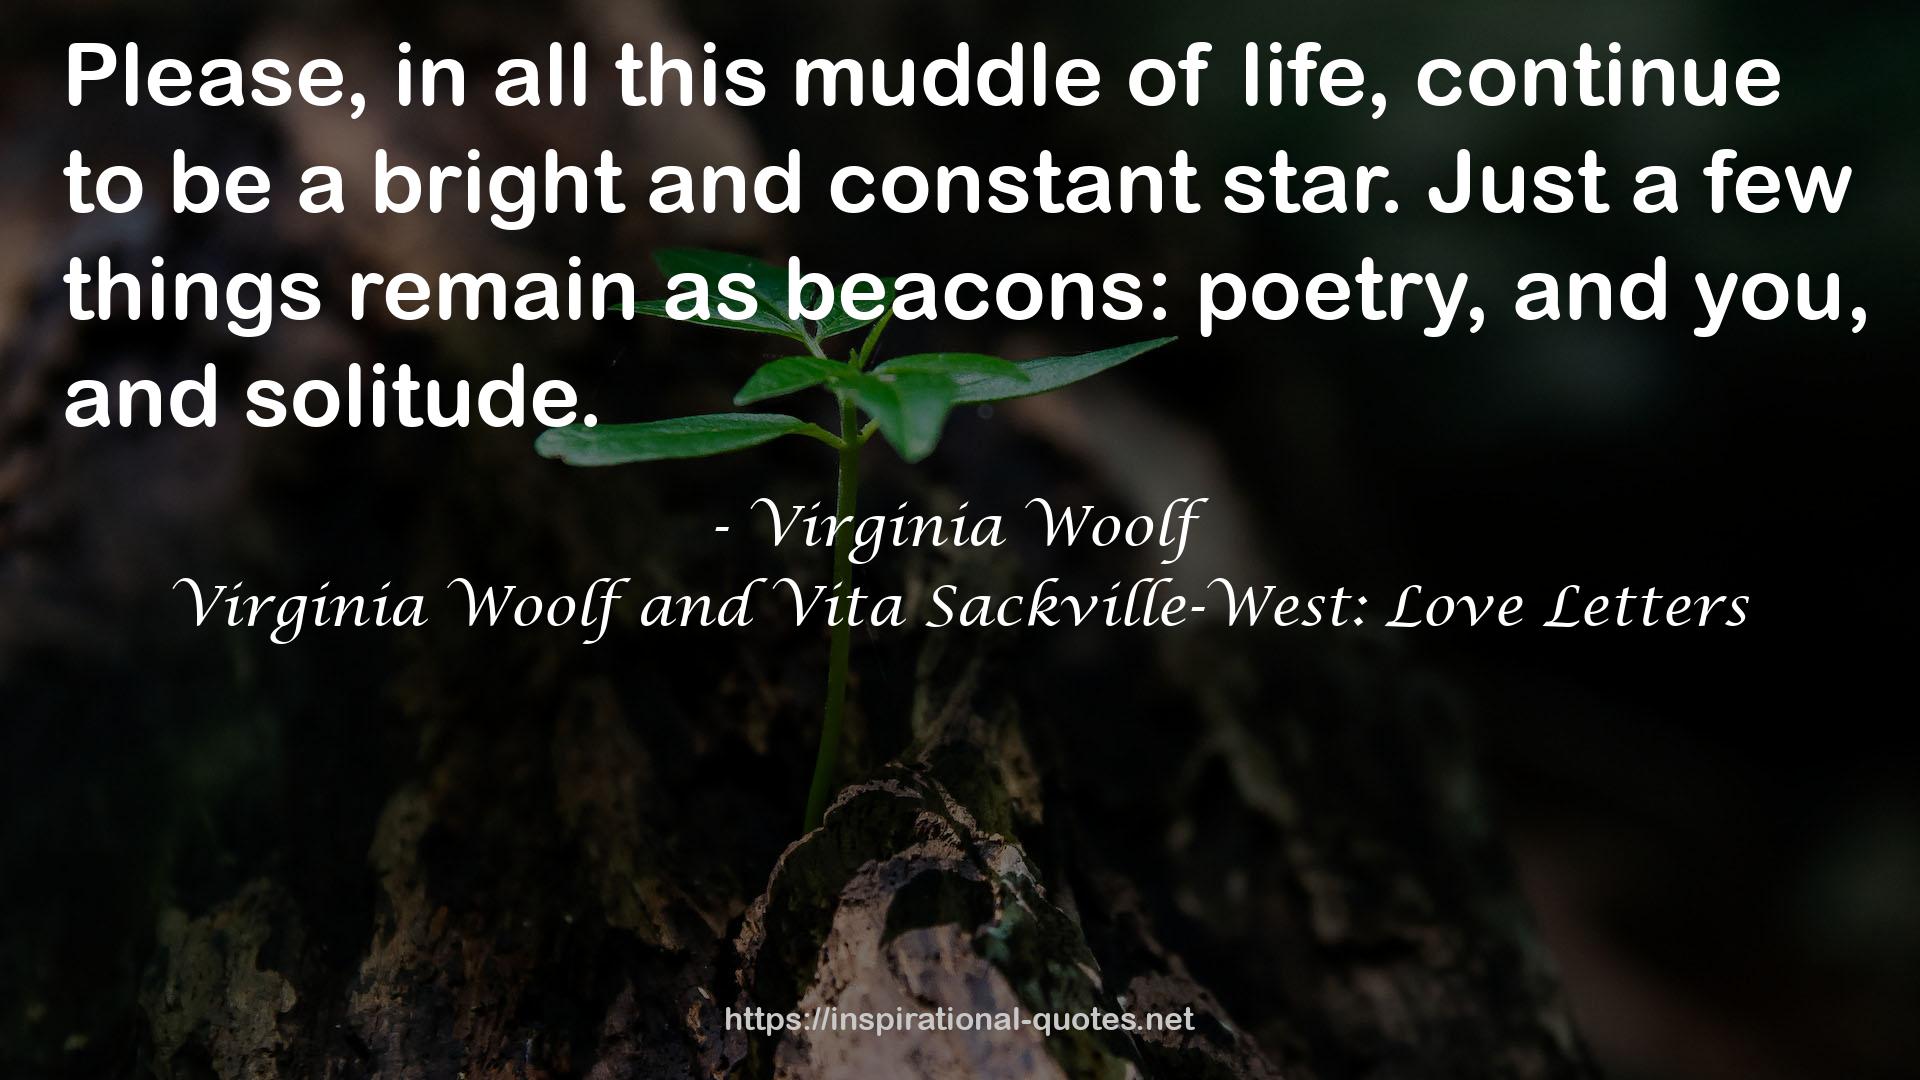 Virginia Woolf and Vita Sackville-West: Love Letters QUOTES